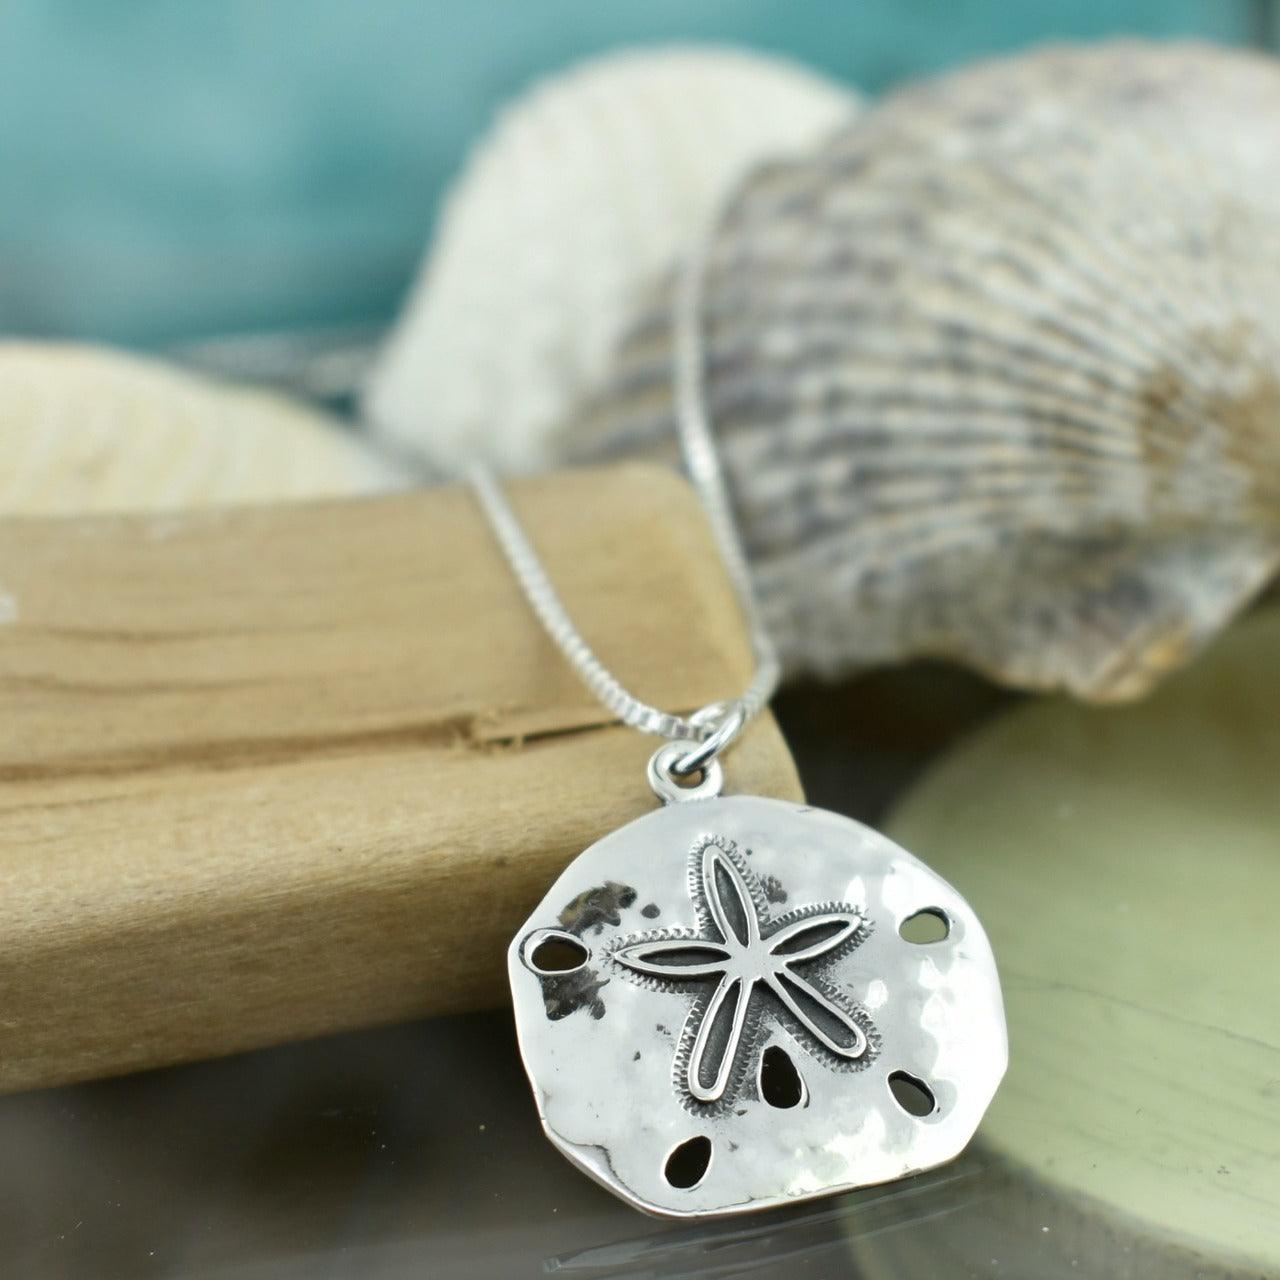 Sand Dollar Summer handcrafted sterling silver necklace